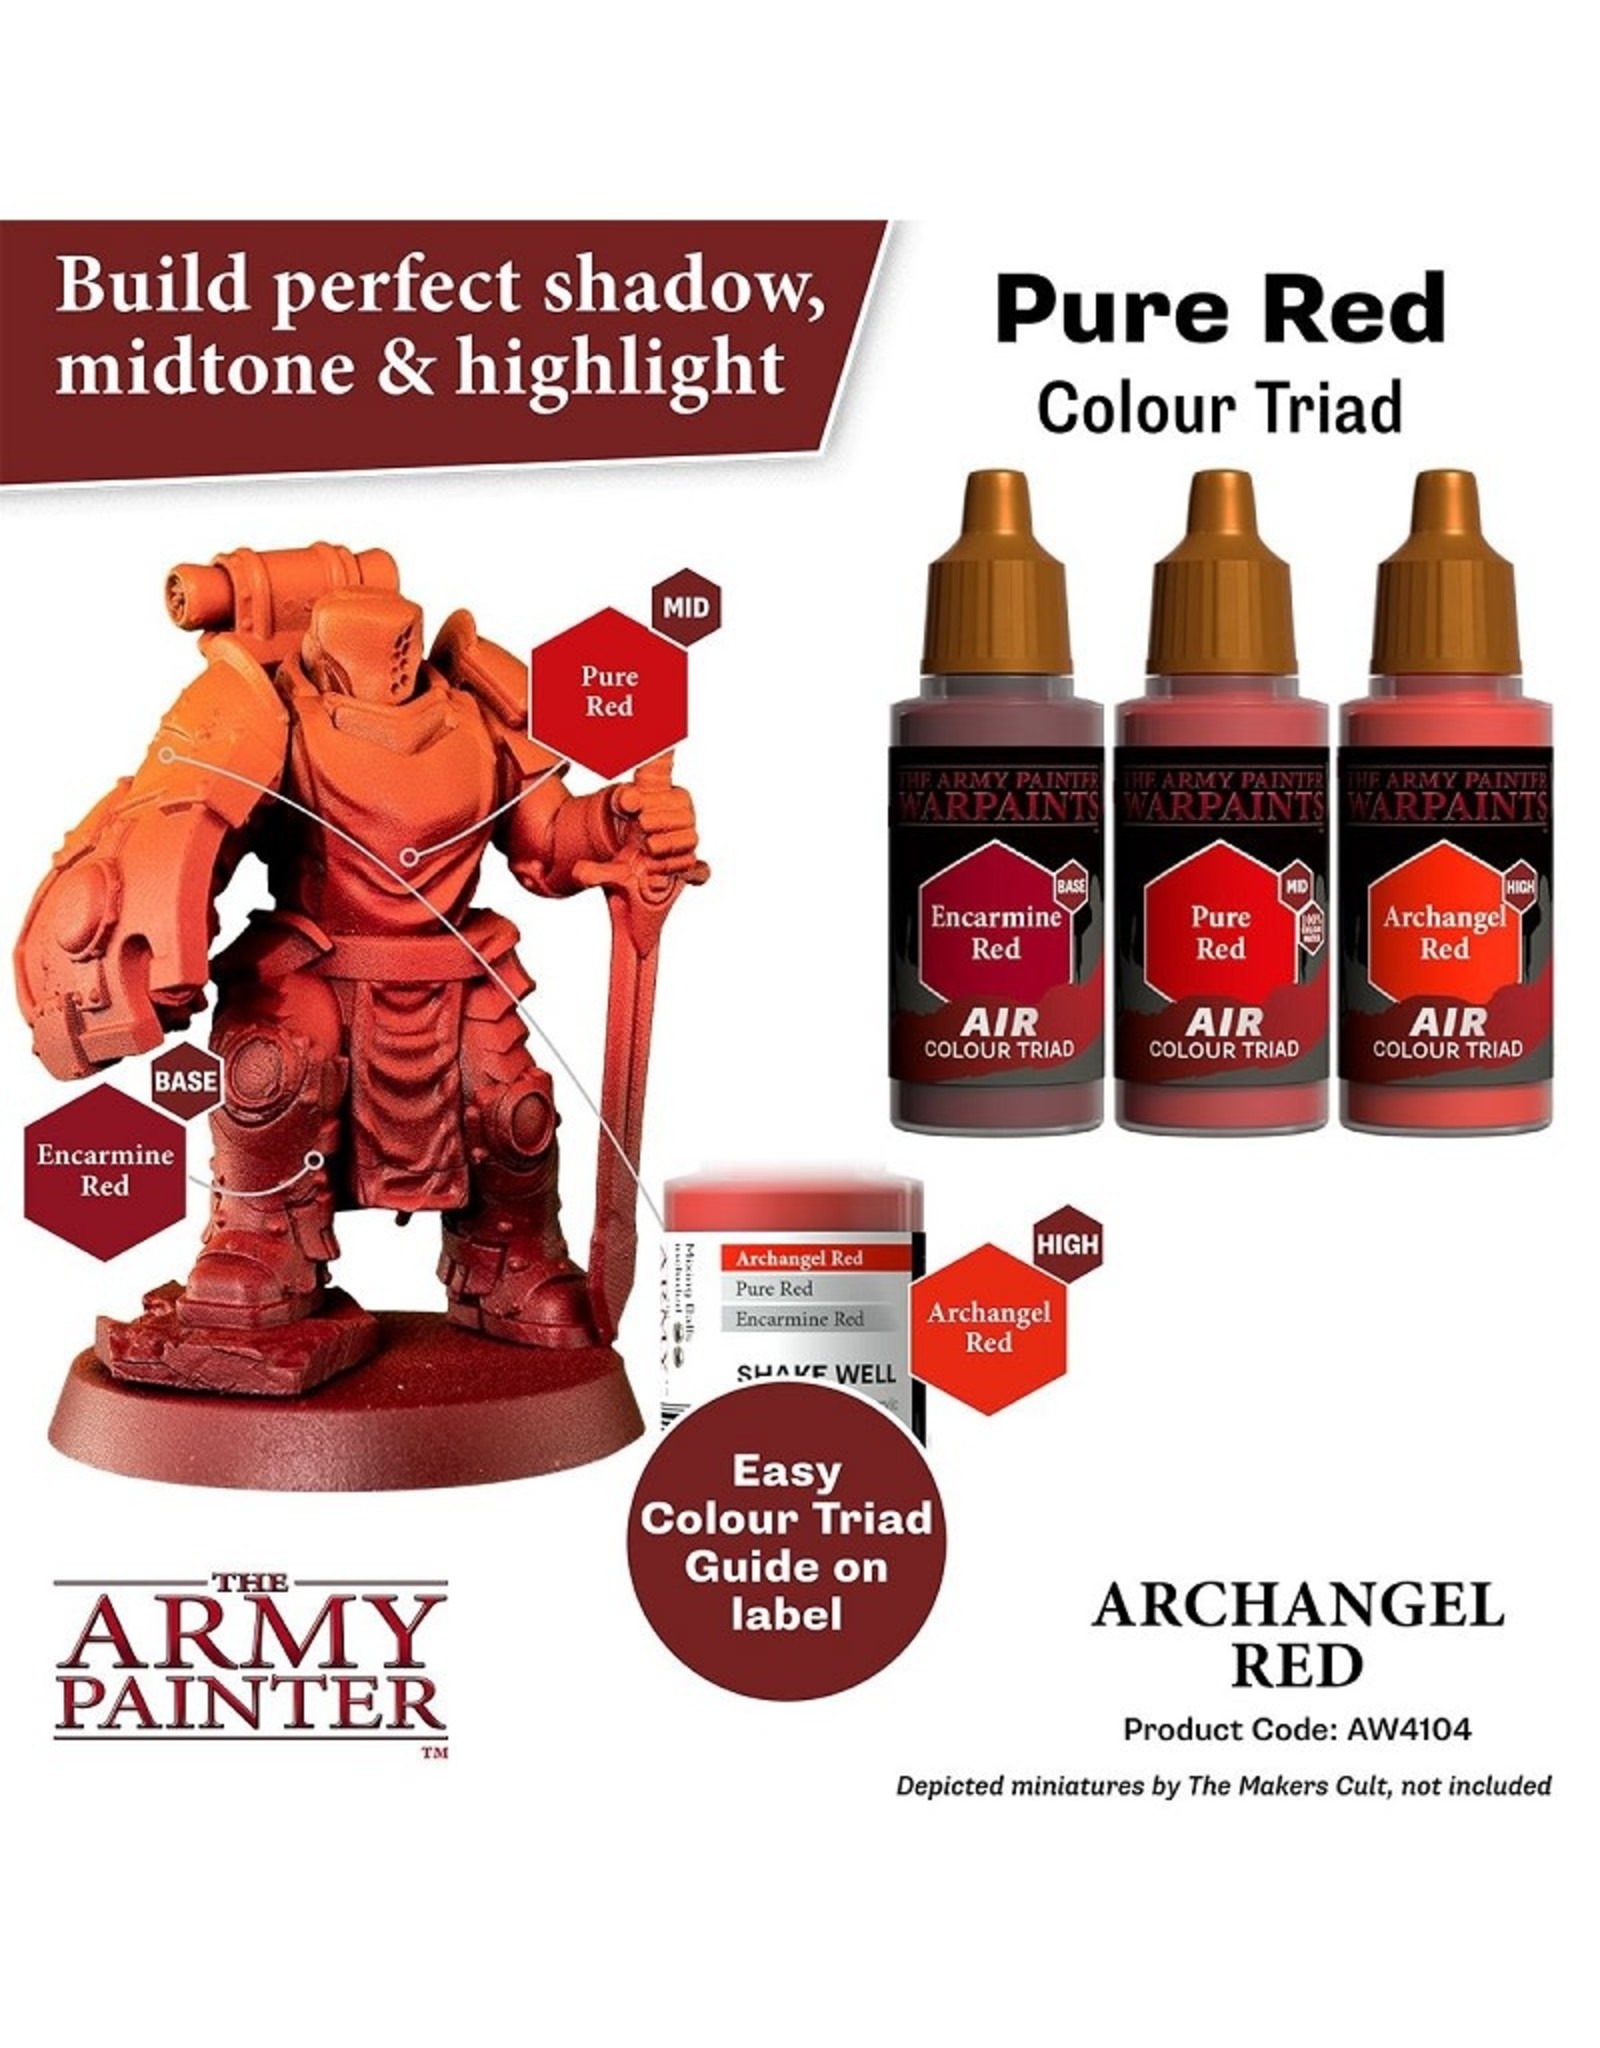 The Army Painter Warpaint Air: Archangel Red (18ml)